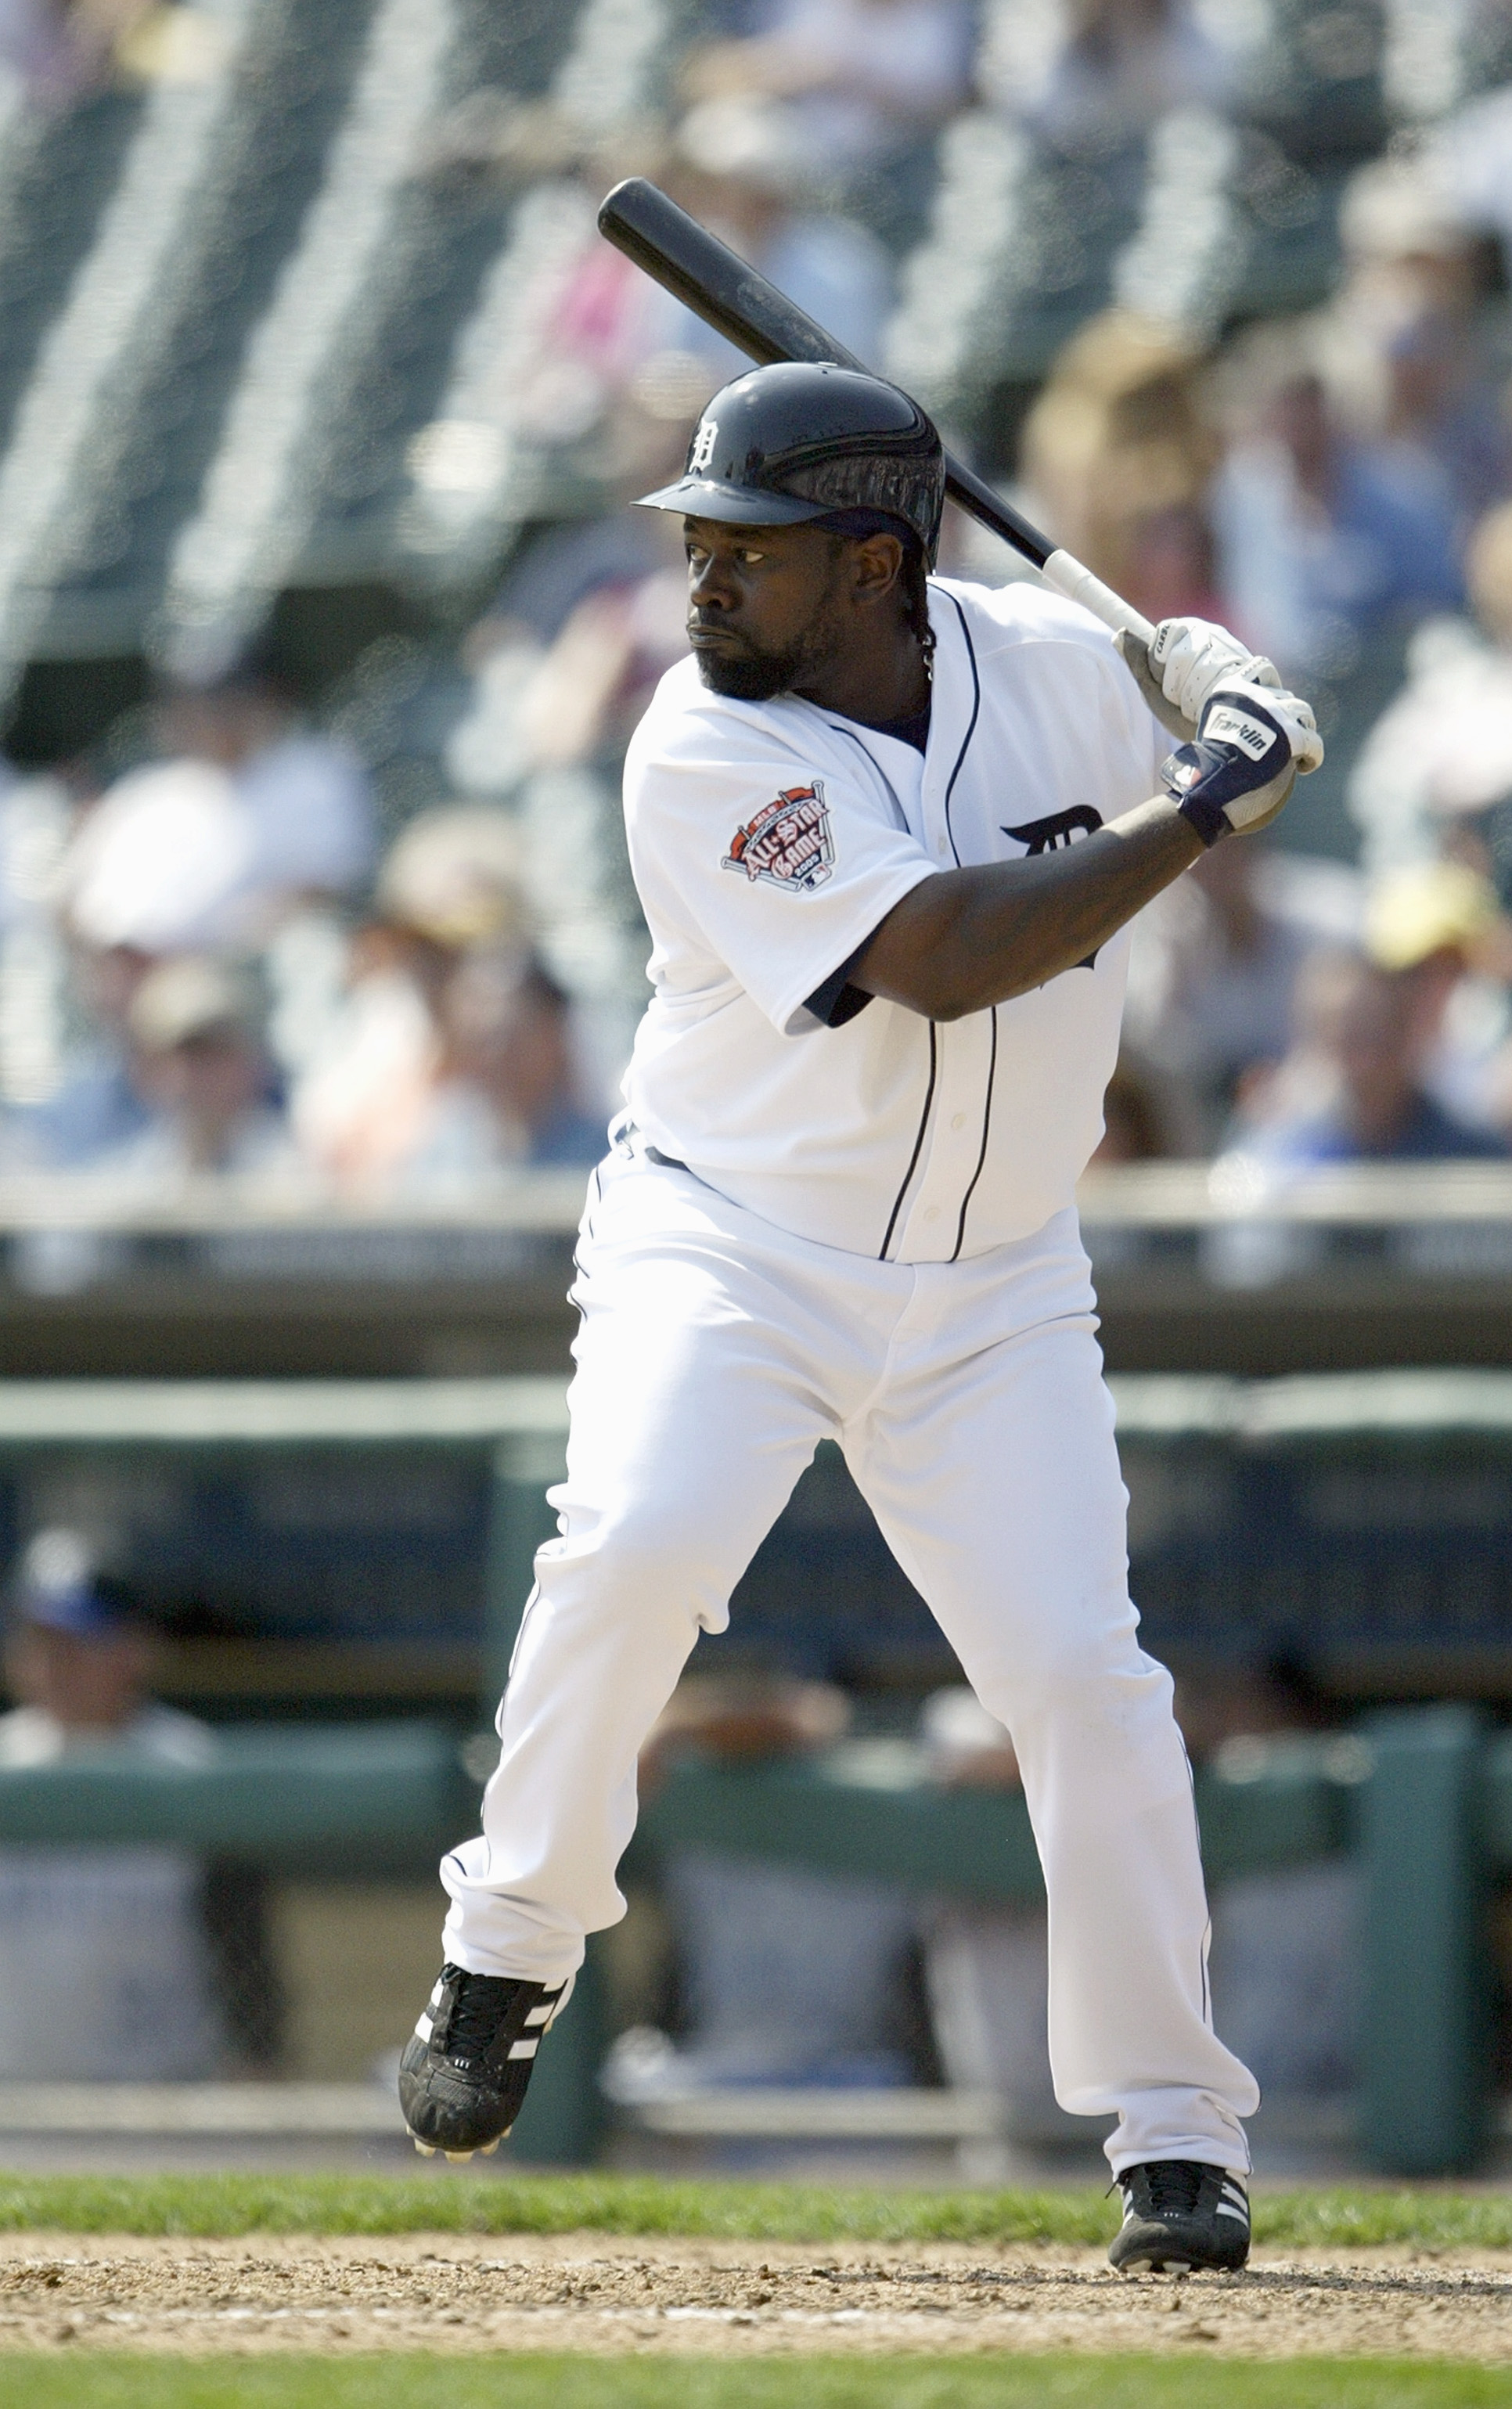 DETROIT - APRIL 6: Dmitri Young #25 of the Detroit Tigers bats during the game with the Kansas City Royals at Comerica Park on April 6, 2005 in Detroit, Michigan. The Royals won 7-2. (Photo by Tom Pidgeon/Getty Images)